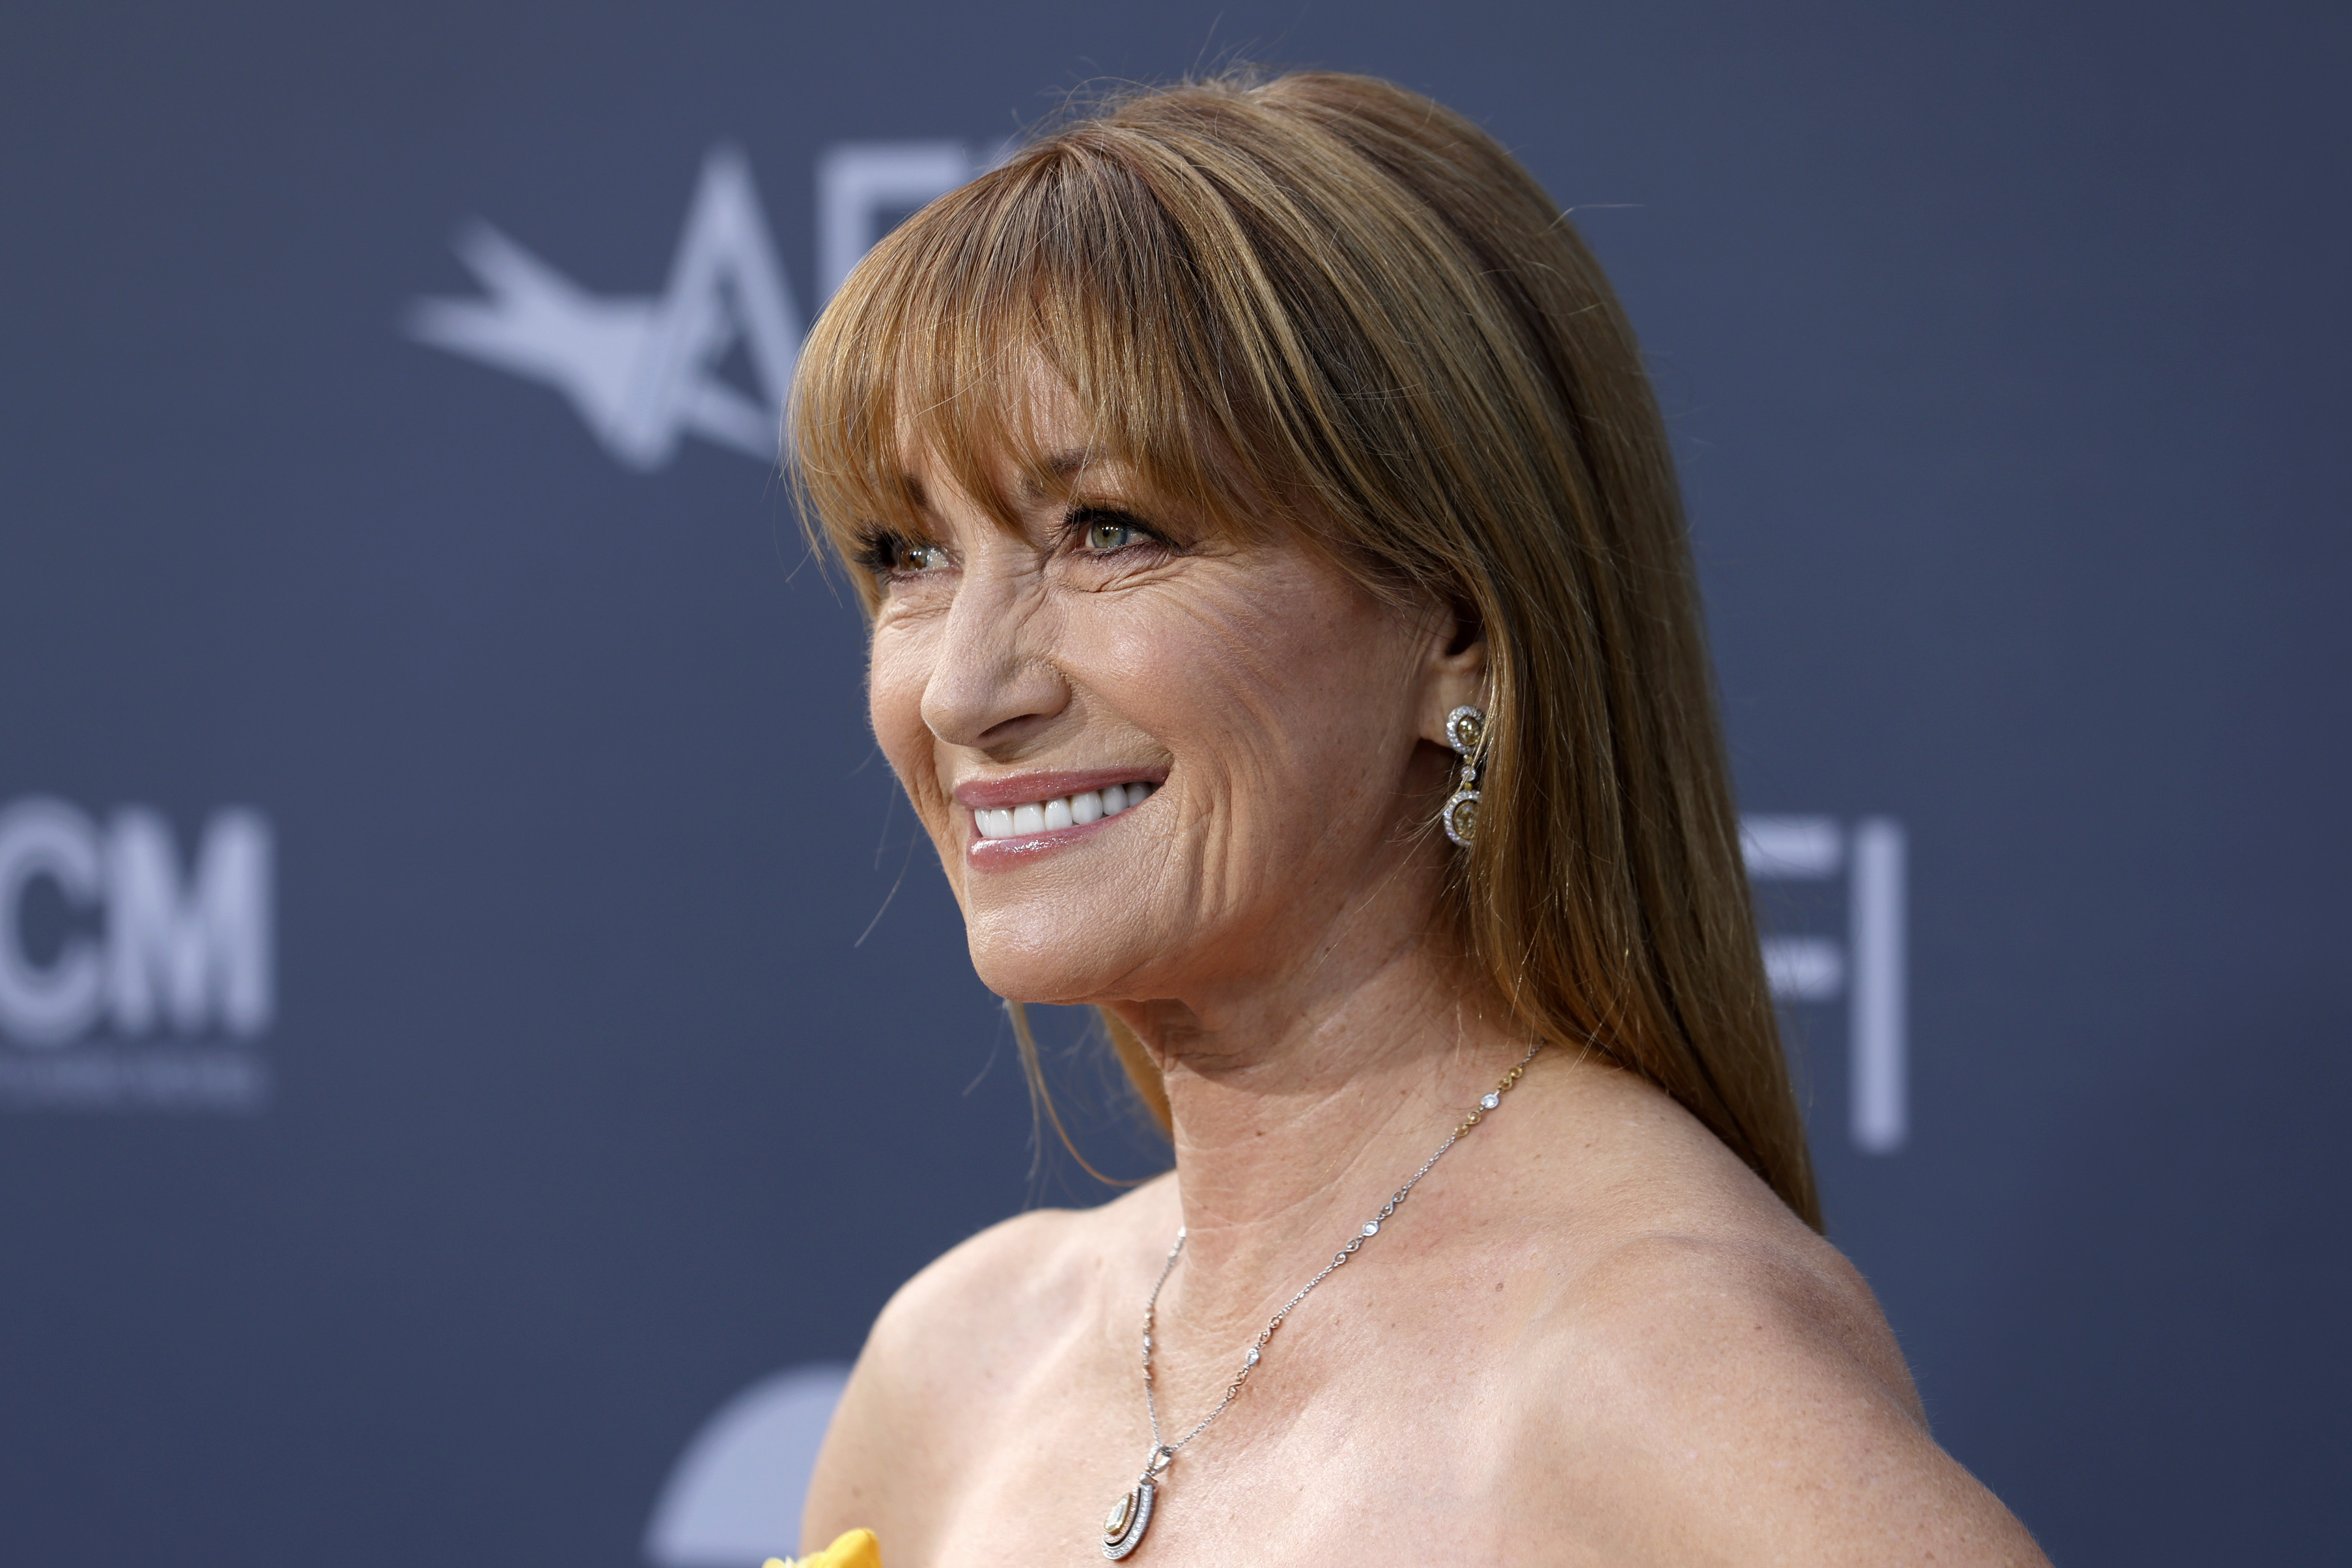 Jane Seymour attends the 48th AFI Life Achievement Award Gala Tribute celebrating Julie Andrews at Dolby Theatre on June 09, 2022 in Hollywood, California | Source: Getty Images